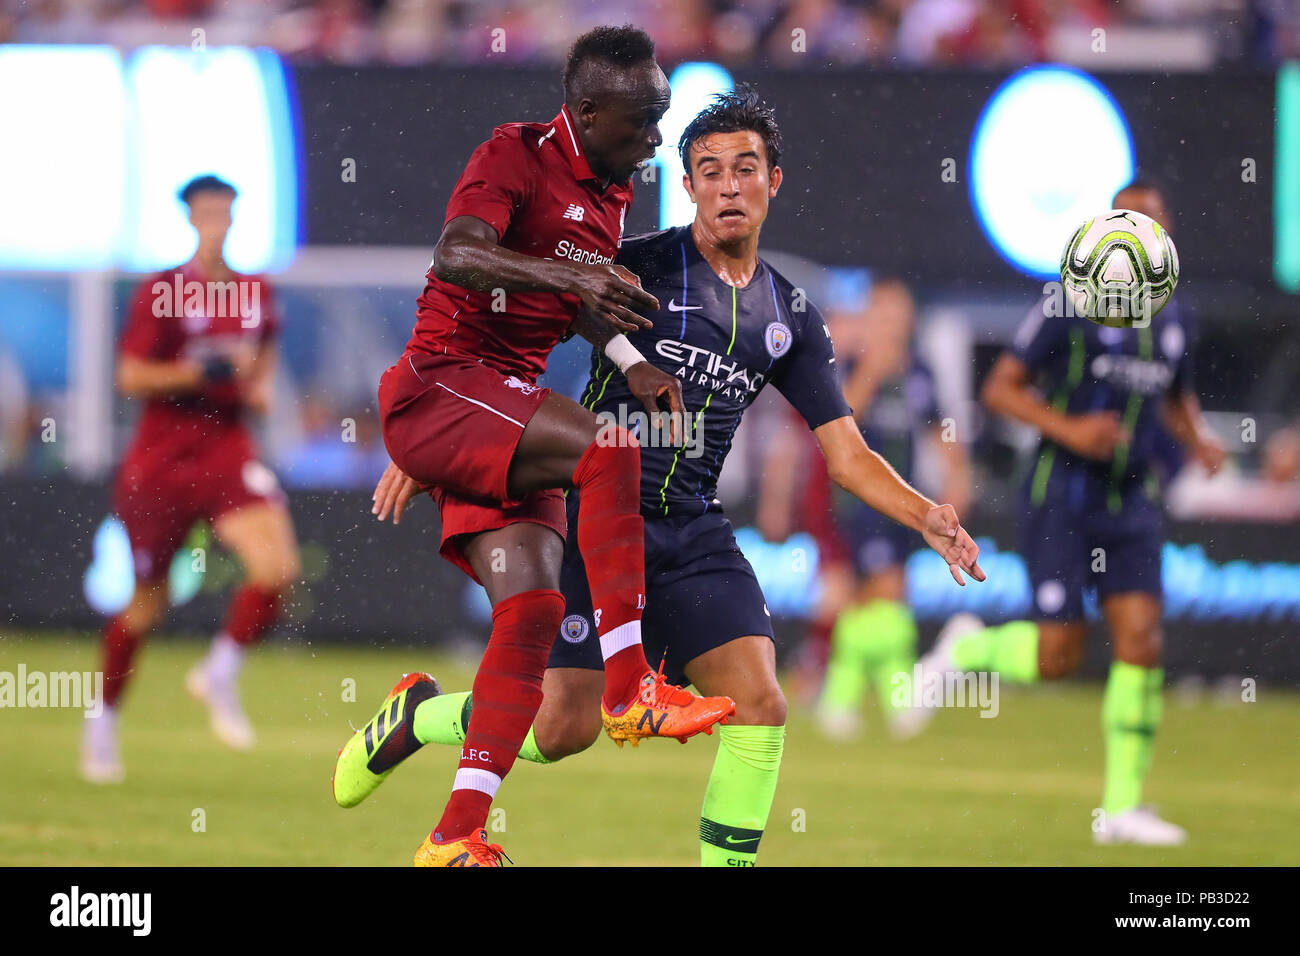 East Rutherford, NJ, USA. 25th July, 2018. Liverpool midfielder Sadio Mane controls the ball during the second half of the International Champions Cup Soccer game between Liverpool and Manchester City on July 25, 2018 at Met Life Stadium in East Rutherford, NJ. Credit: Action Plus Sports/Alamy Live News Stock Photo